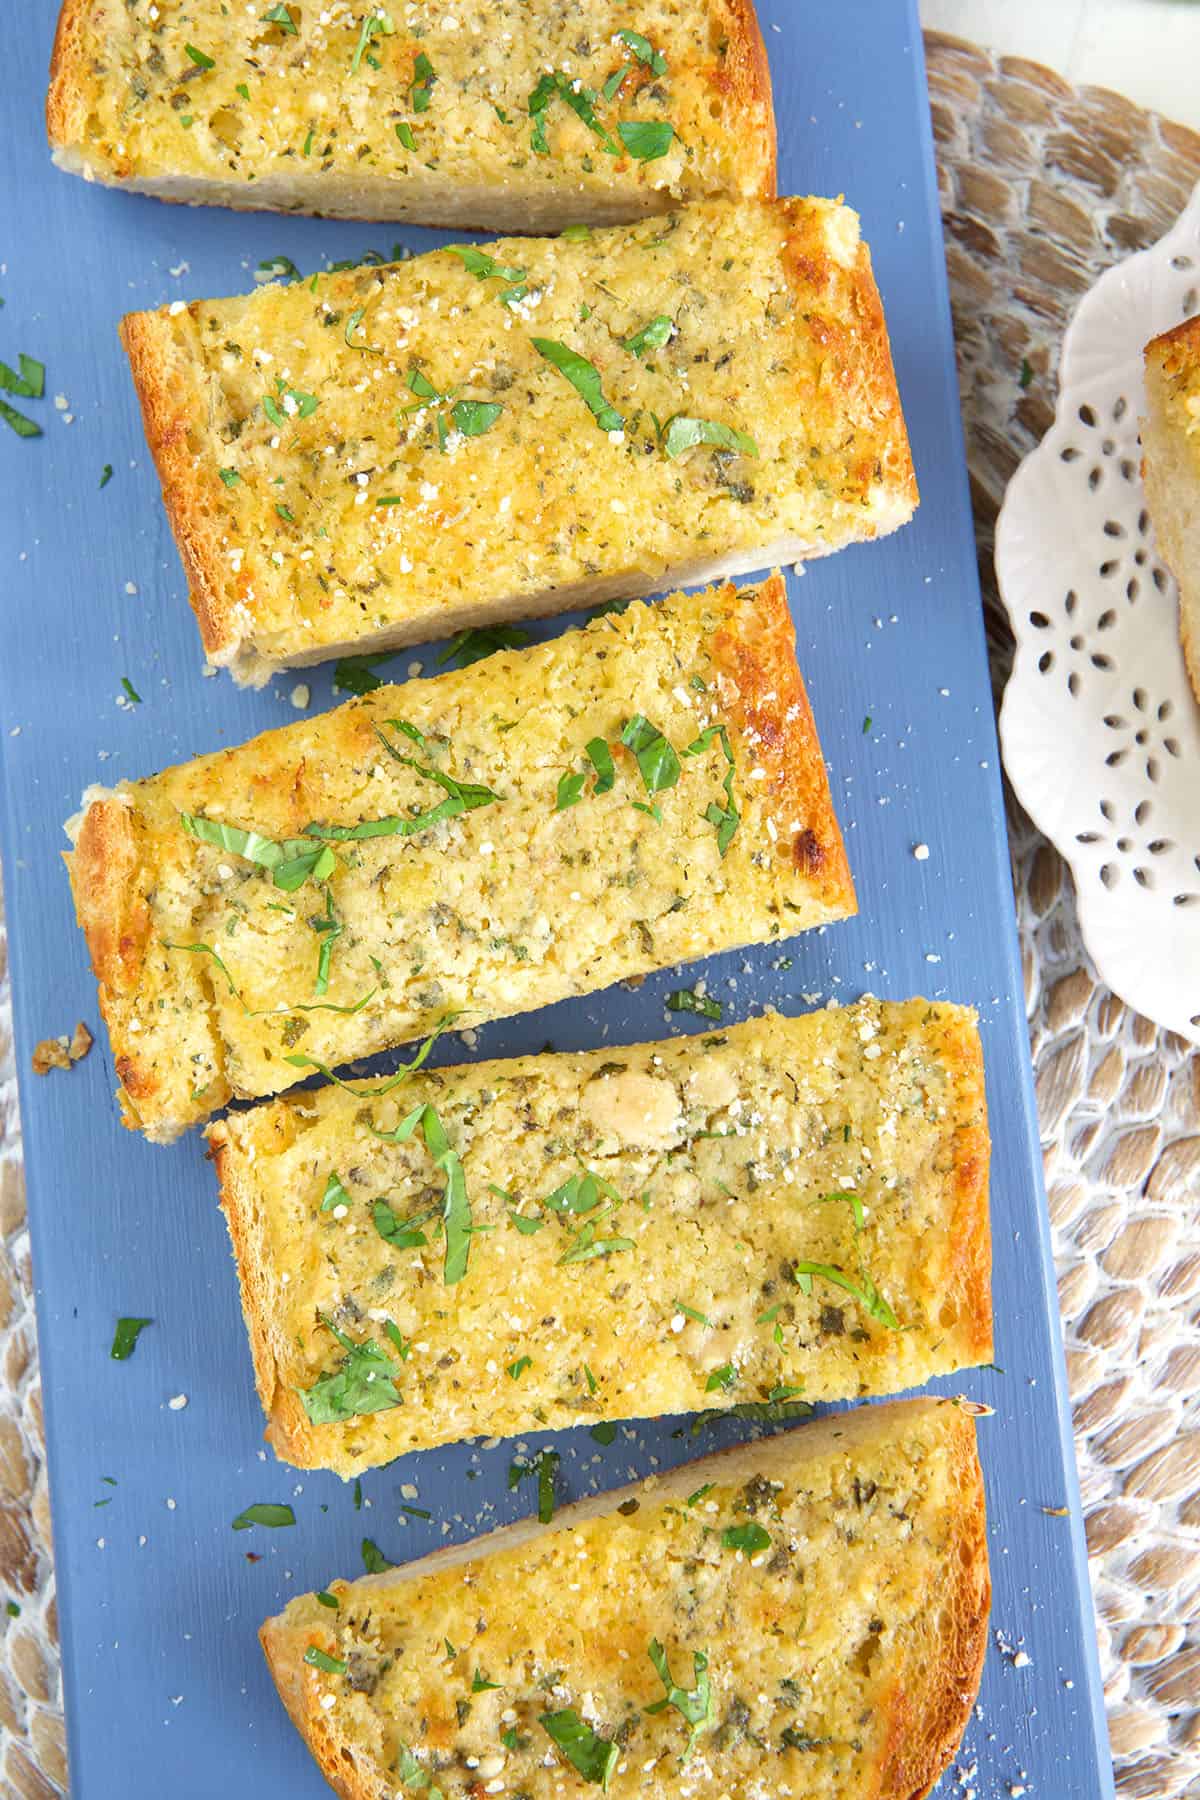 Slices of garlic bread are placed on a blue plate. 